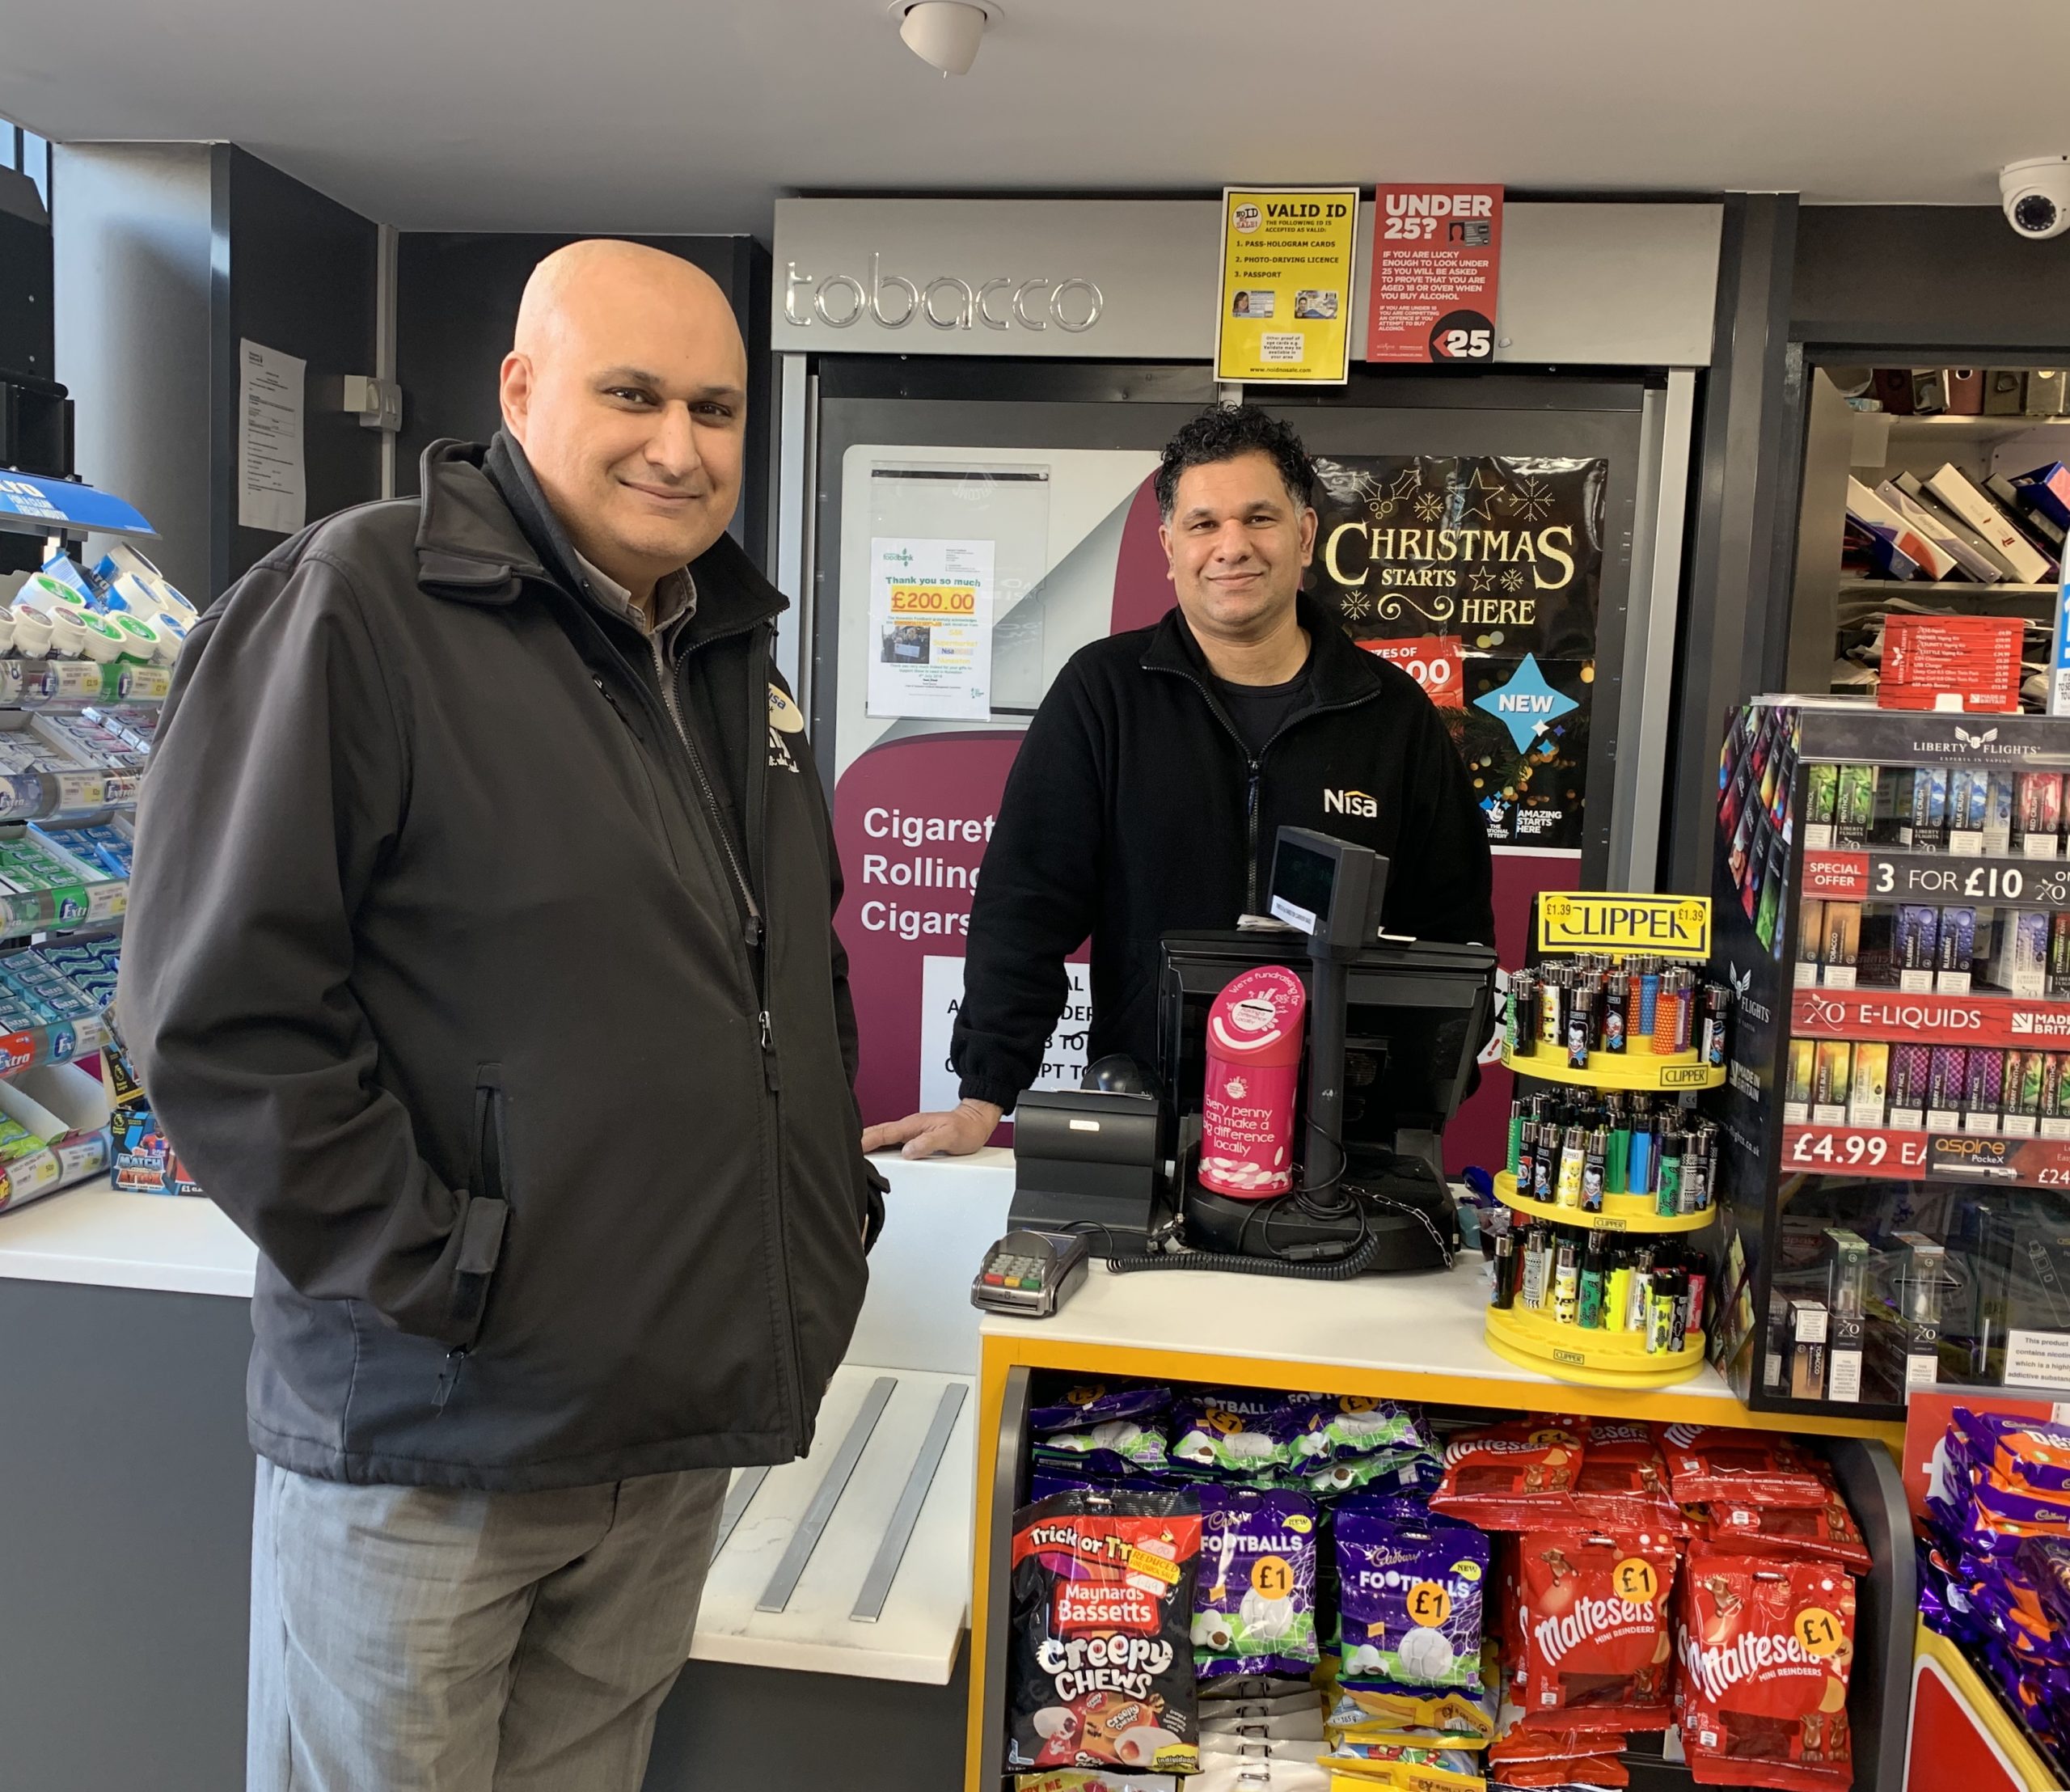 Nisa retailers raise milestone figure with MADL charity collecting tins